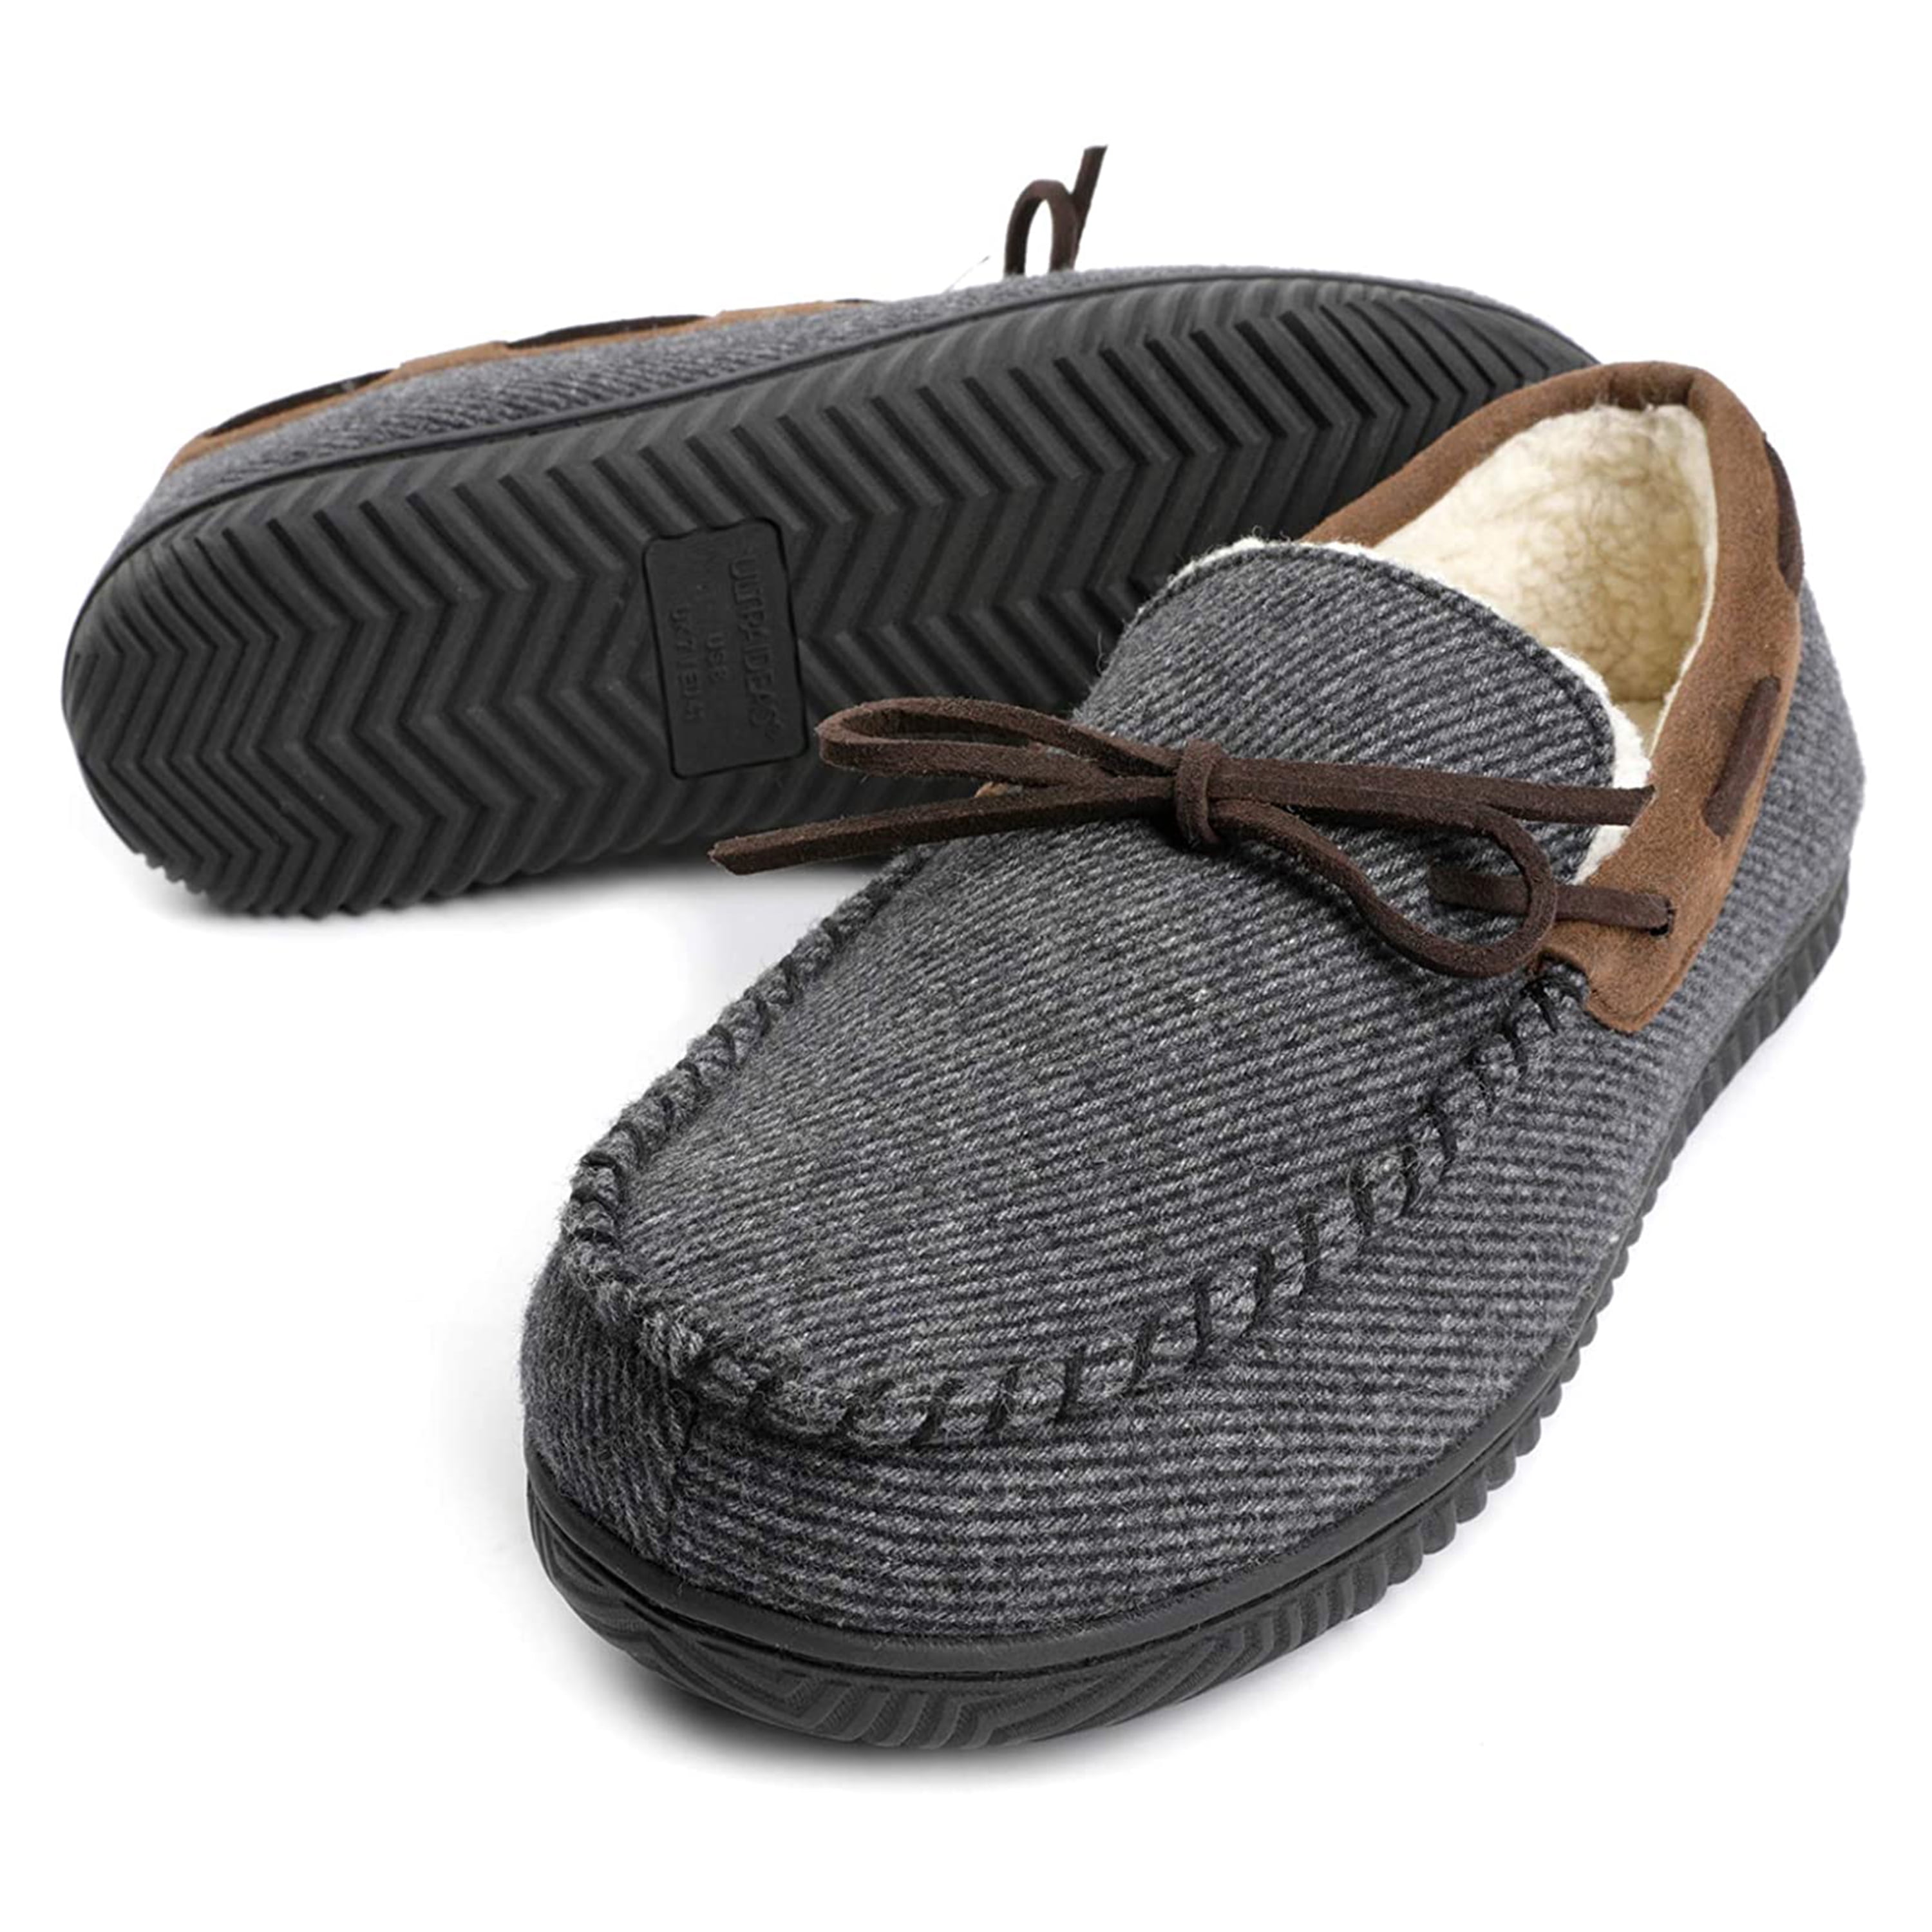 Mens slippers fleece lined Winter Warm Hard Sole Comfort Dads Gift Shoes Sizes 